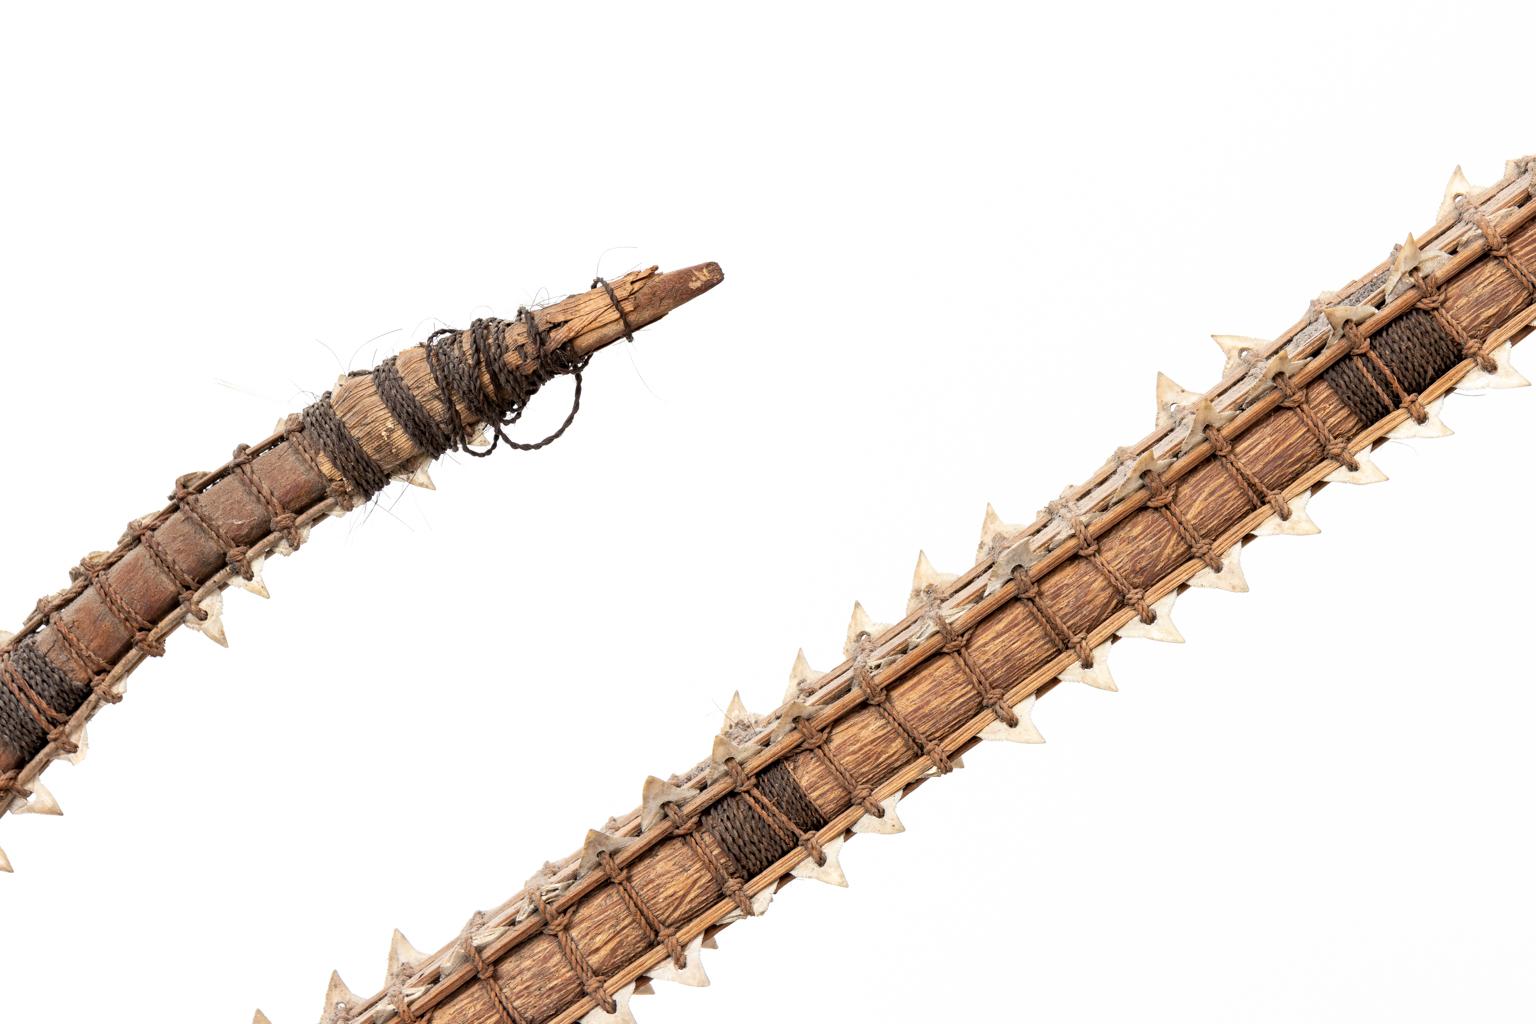 Circa 19th century or earlier shark teeth edged sword from the Gilbert Islands. The Islands were so scarce on resources surrounded by shark populated waters that swords were made by mounting shark's teeth on palm wedge strips and bound with cords of